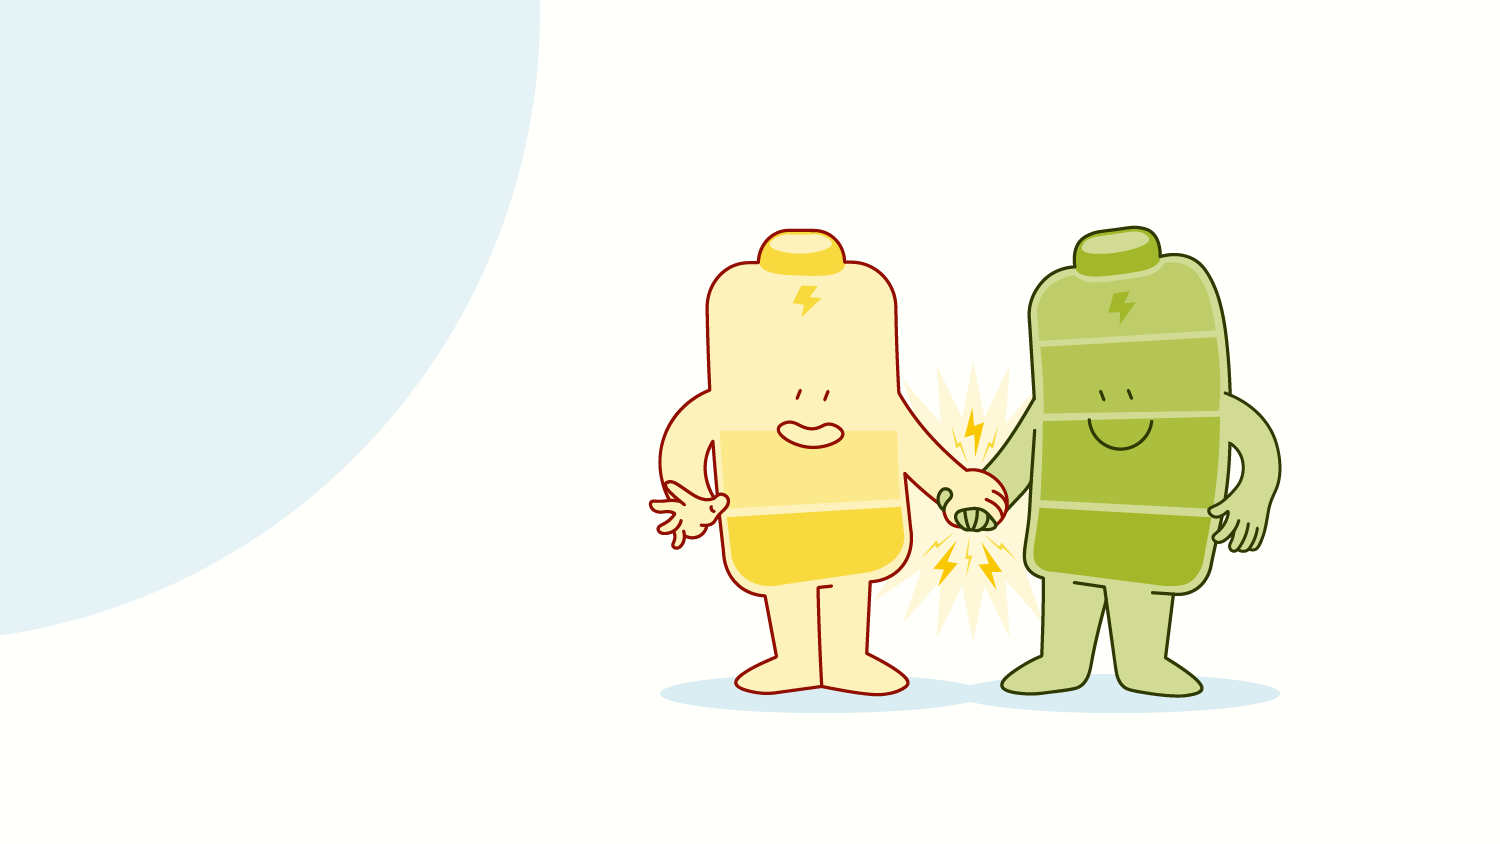 An illustration shows two battery-shaped characters holding hands, while one charges the other.